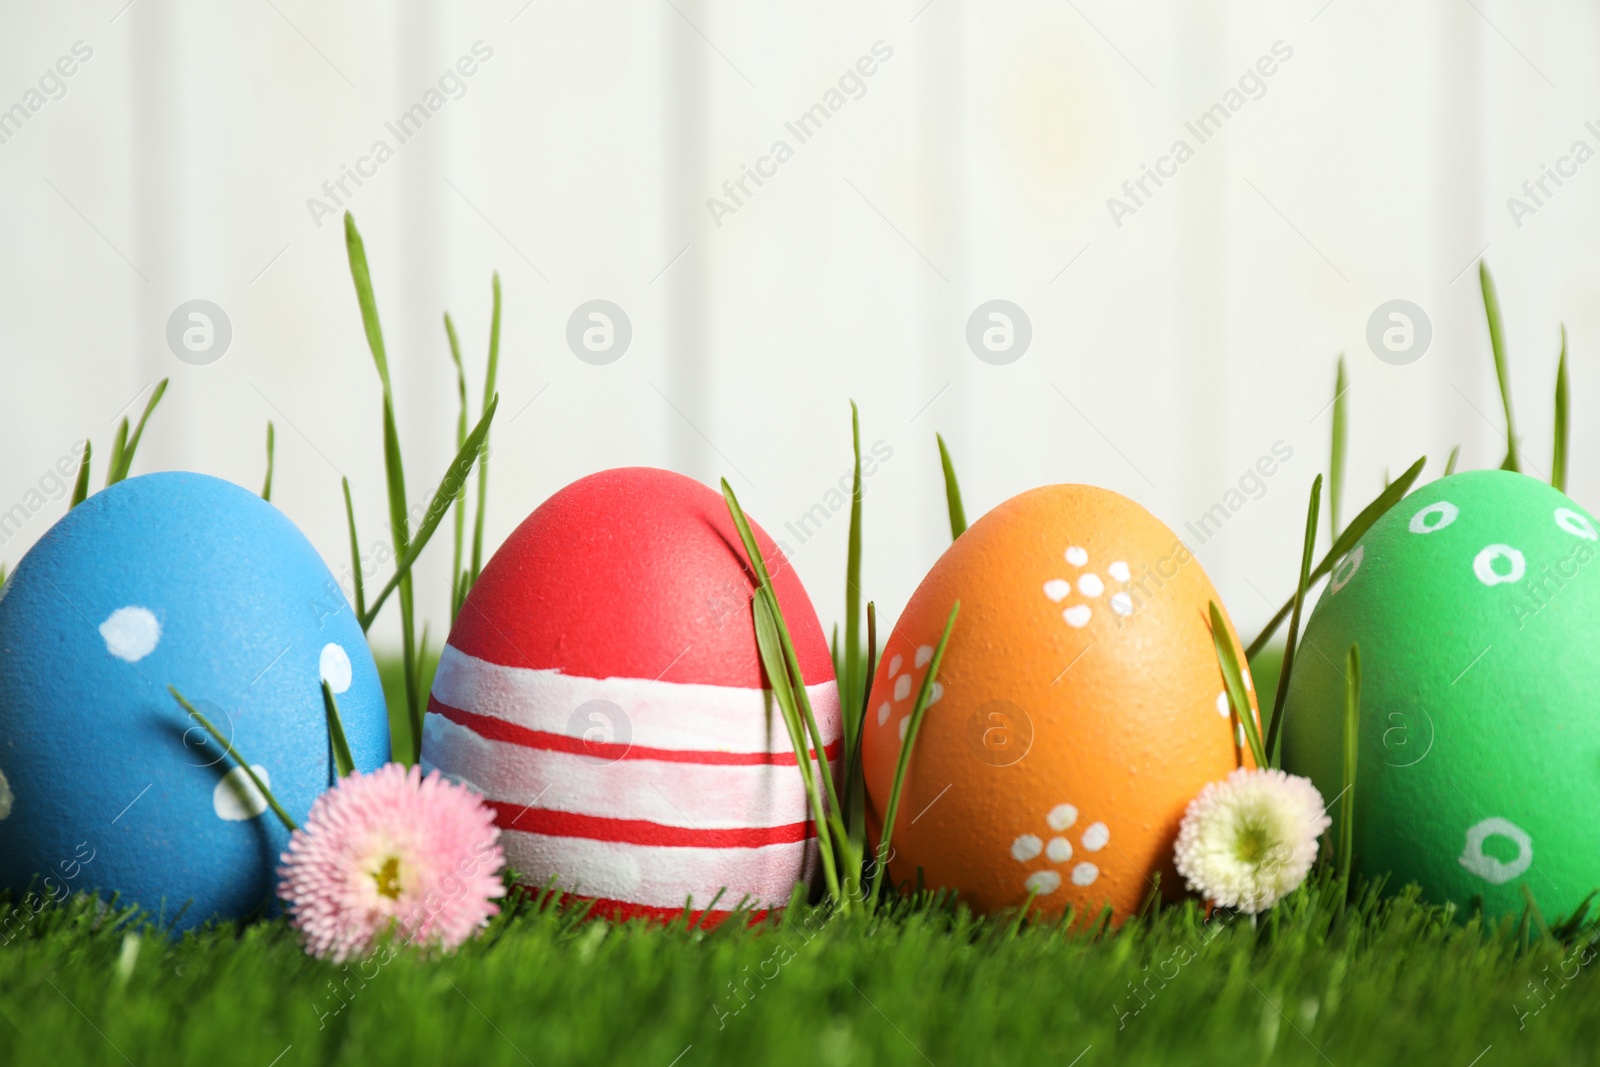 Photo of Colorful Easter eggs and daisy flowers in green grass against white background, closeup